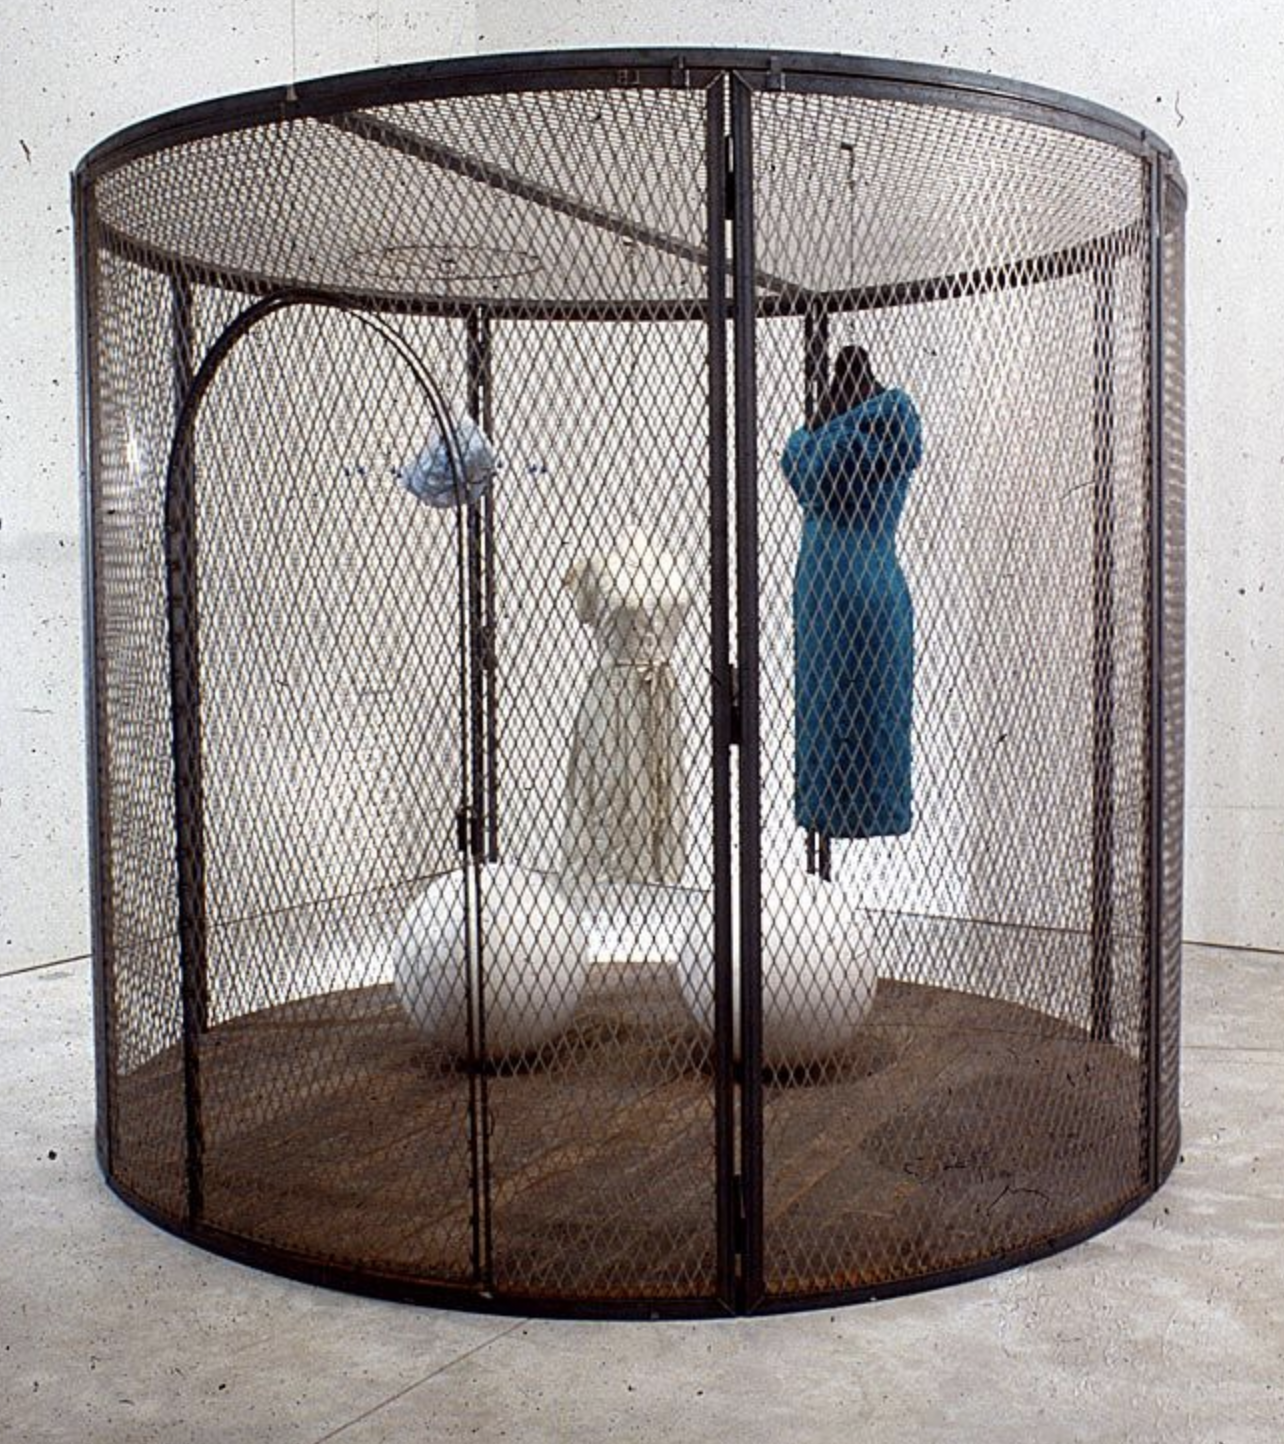 The Fertile Metaphor: Louise Bourgeois and 'The Woven Child' — Jim